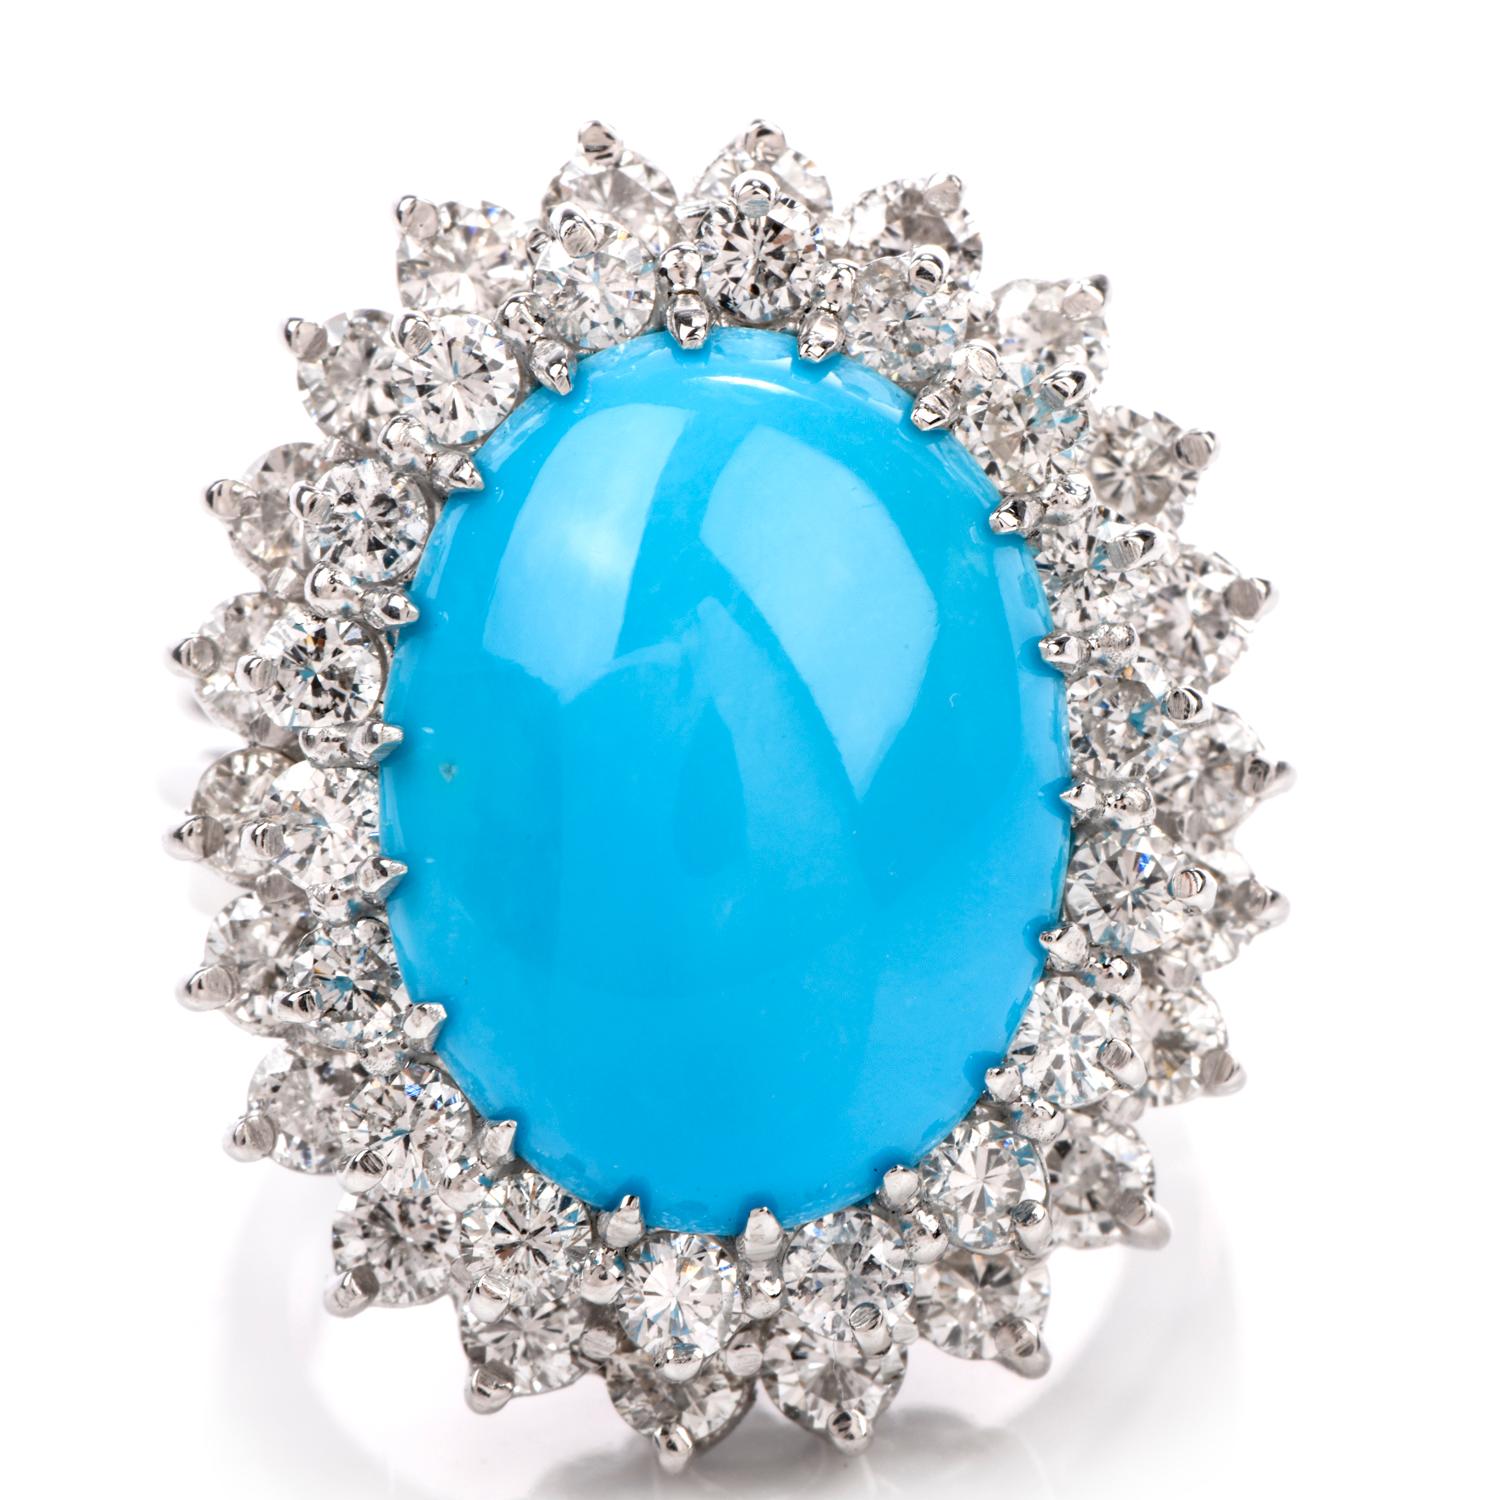 This Diamond and Oval Turquoise Statement Ring was inspired in a Double Halo  and crafted in 9.0 grams of 18k white gold. Centered is an oval cabochon Turquoise measuring

approximately 15.8 x 12.3mm; weighing approx. 6.93 carats and is surrounded